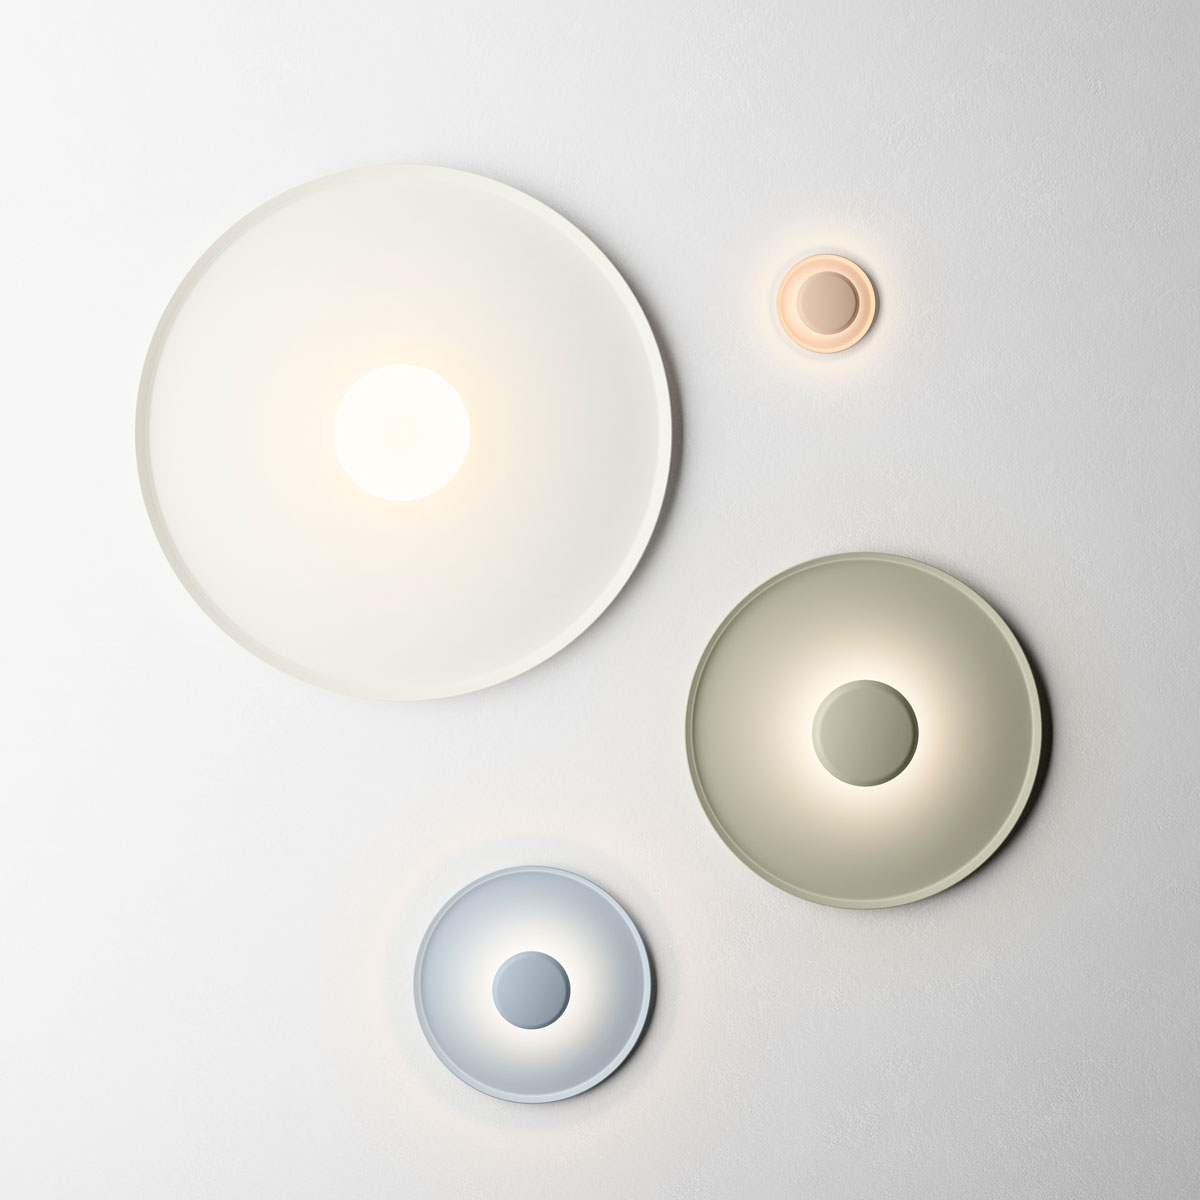 Vibia The Edit - The Epicenter of Light: Introducing Vibia’s Top Collection